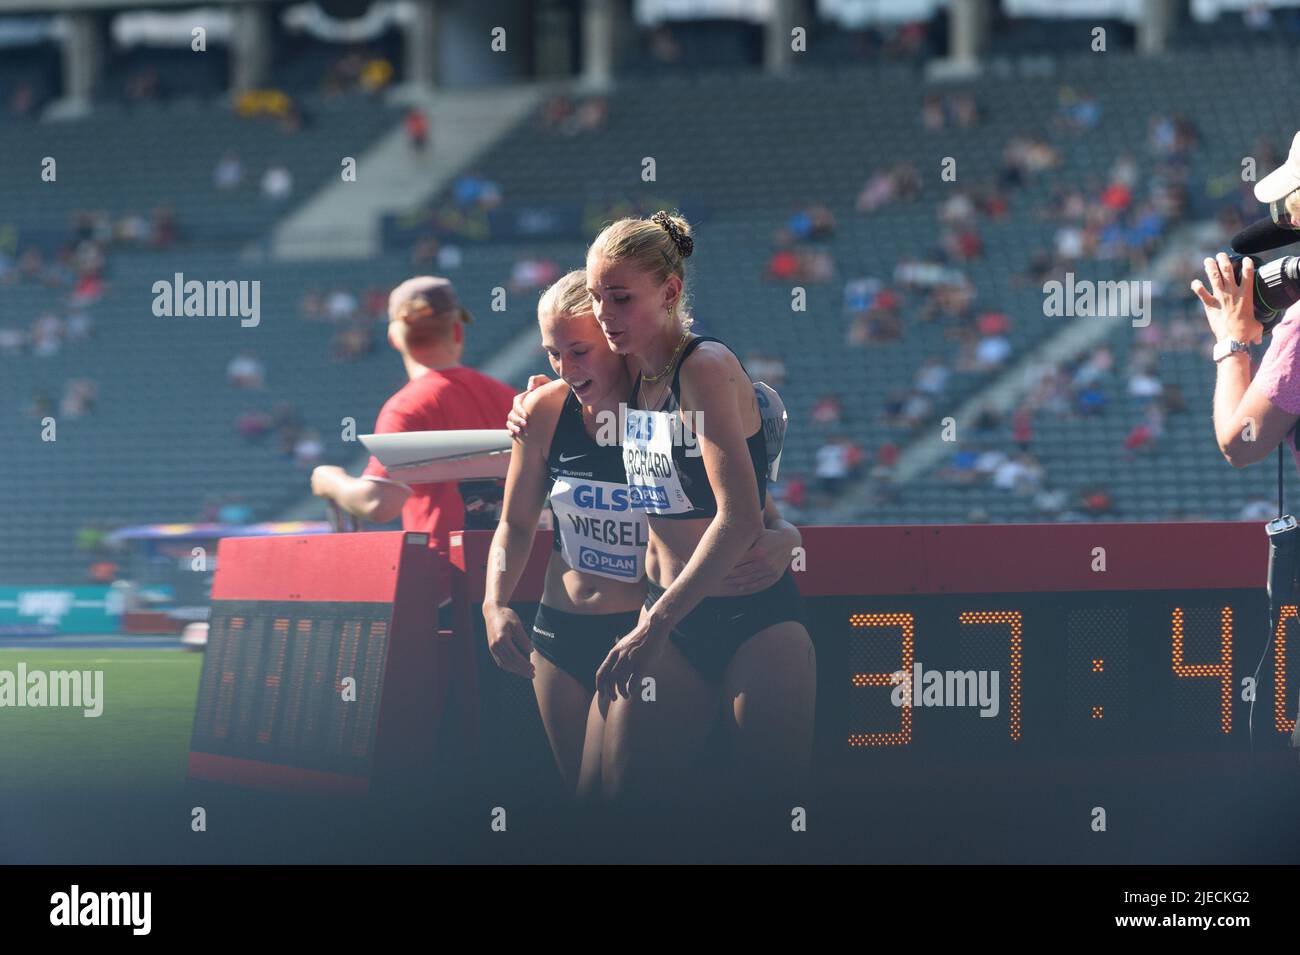 Marie Burchard (SC DHfK Leipzig e.V. ) and Nele Wessel (Eintracht Frankfurt e.V.) after the 1500 metre final during the 2022 athletic German championship finals at Olympiastadion, Berlin.  Sven Beyrich/SPP Stock Photo